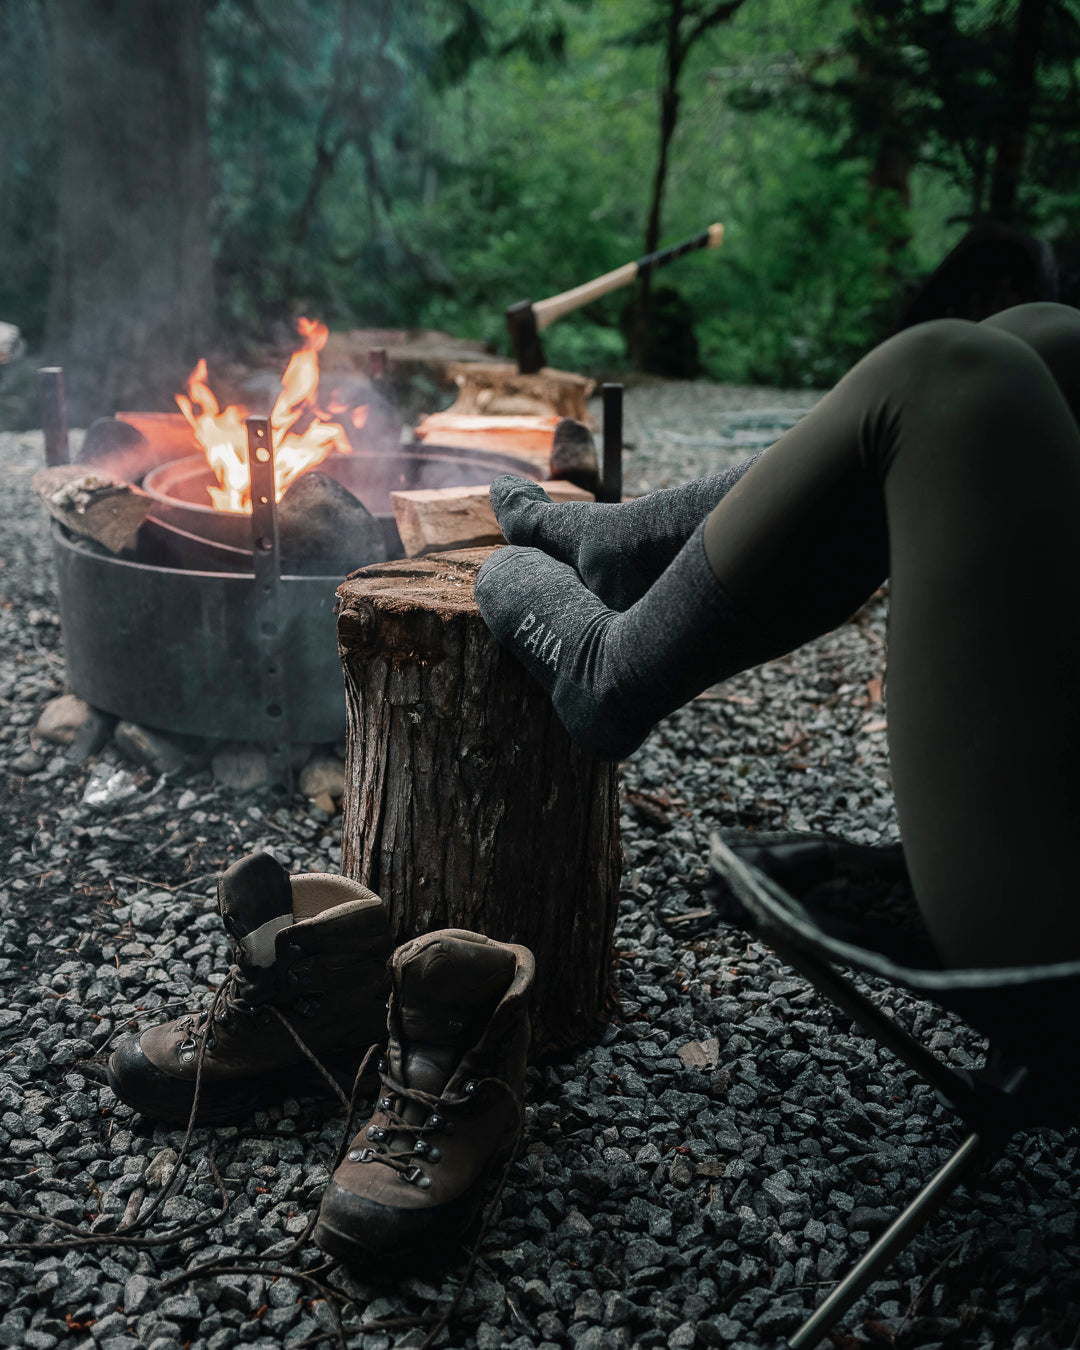 Dark grey Paka socks on wooden stump in front of boots and campfire